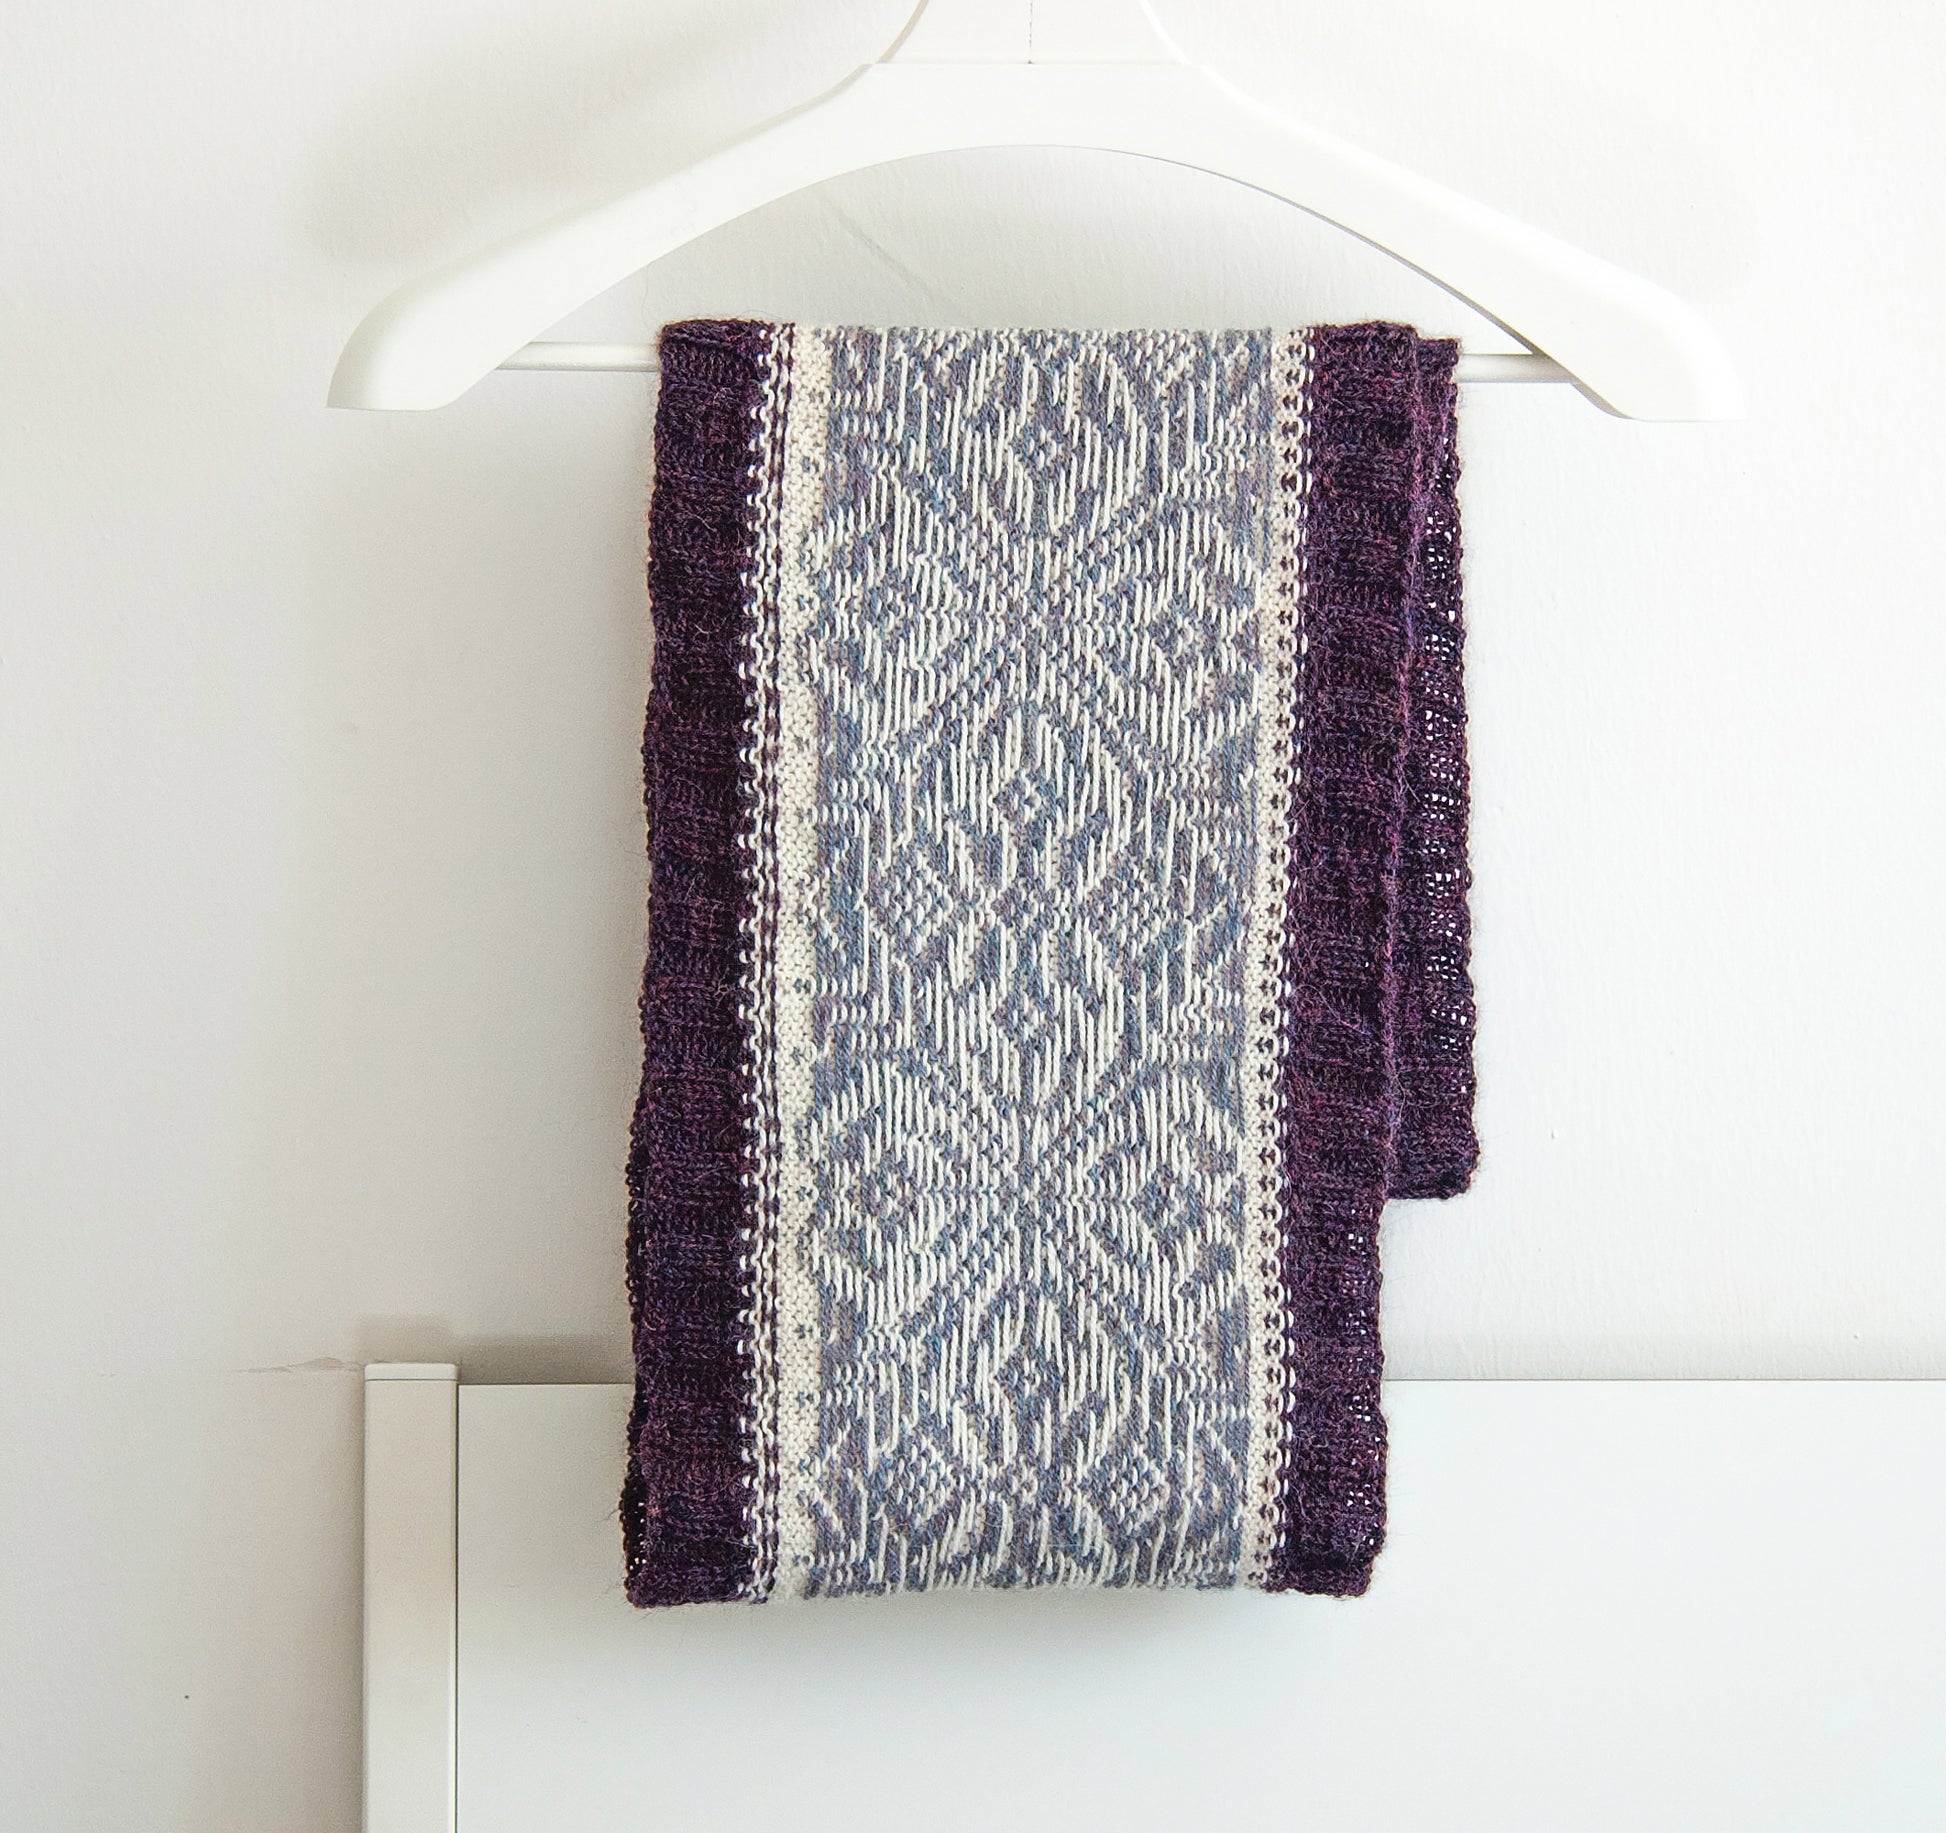 hand-knitted Fair Isle cowl  in Snowflake pattern made from purple and white alpaca wool yarn, wrong side